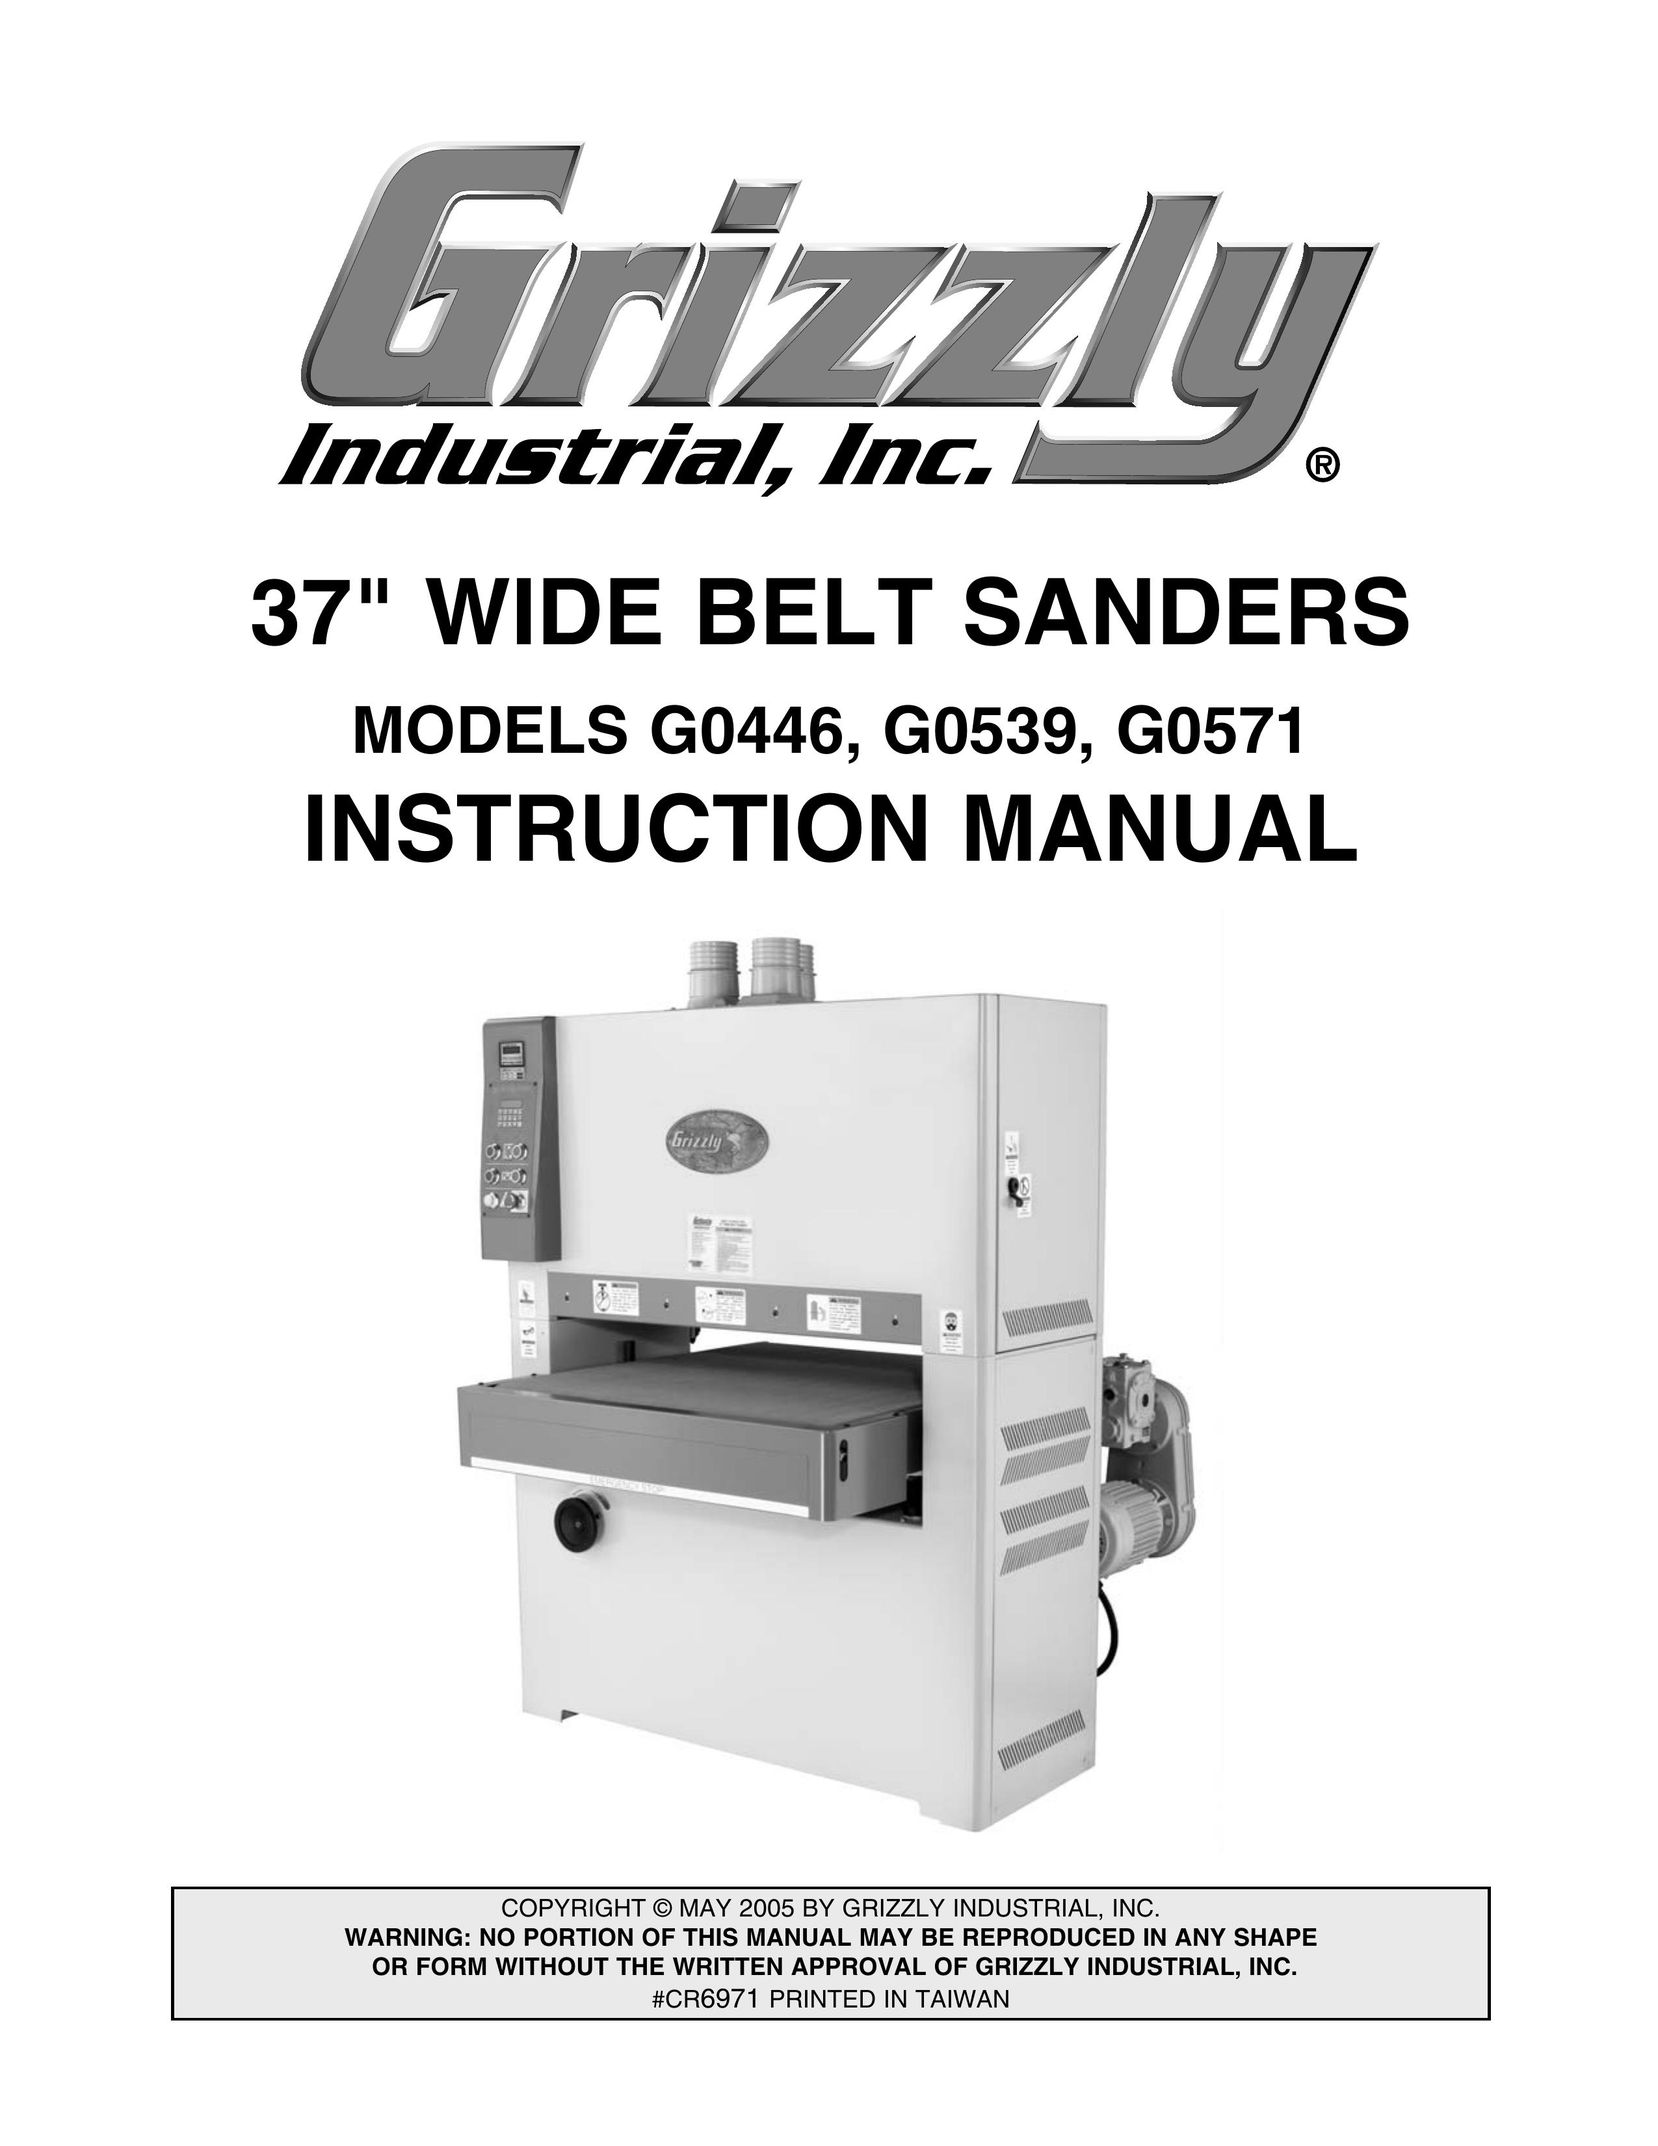 Grizzly G0571 Sander User Manual